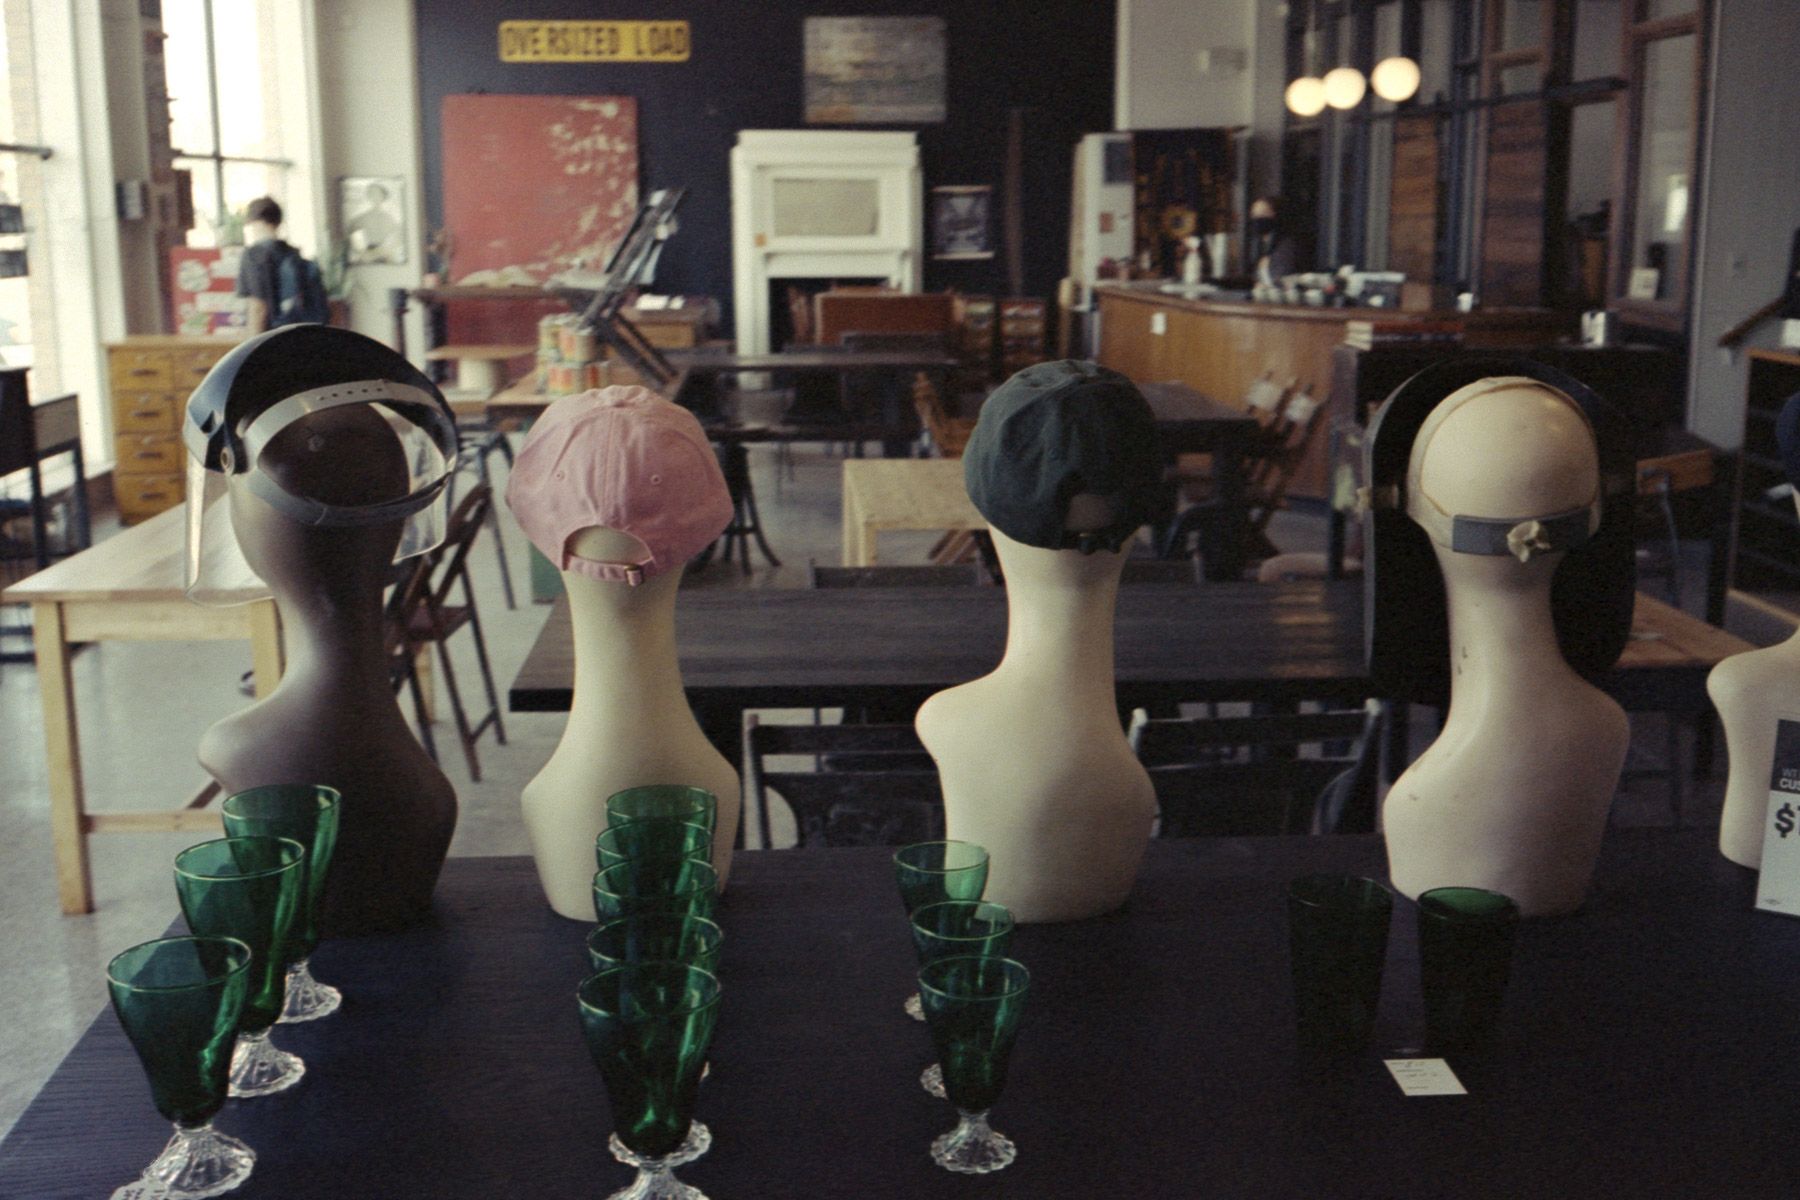 Row of vintage store masked and behatted mannequin heads, shot from behind.